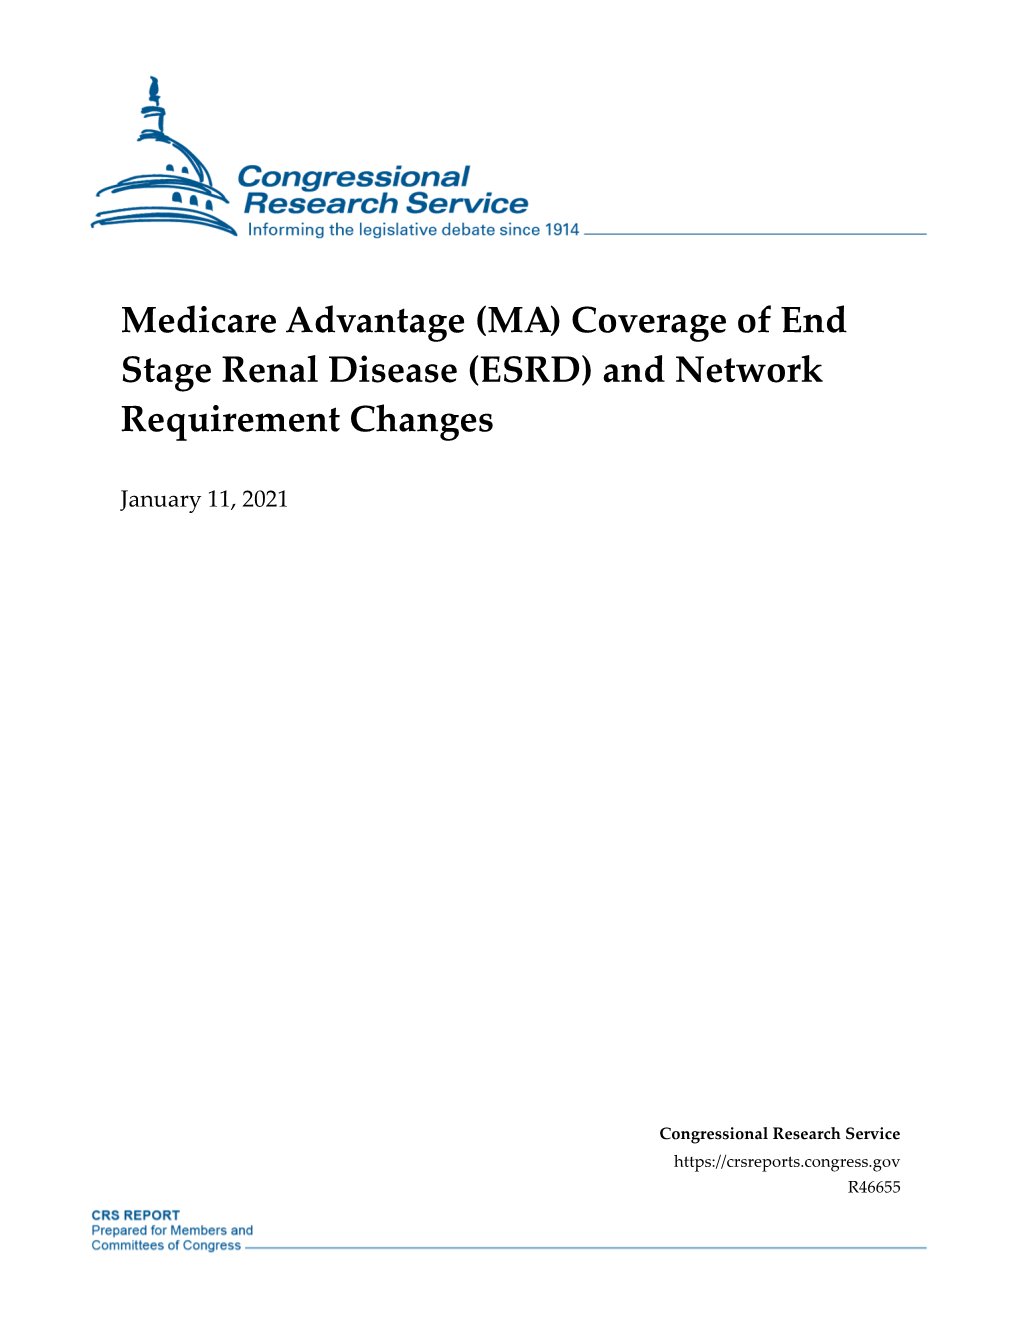 Medicare Advantage (MA) Coverage of End Stage Renal Disease (ESRD) and Network Requirement Changes